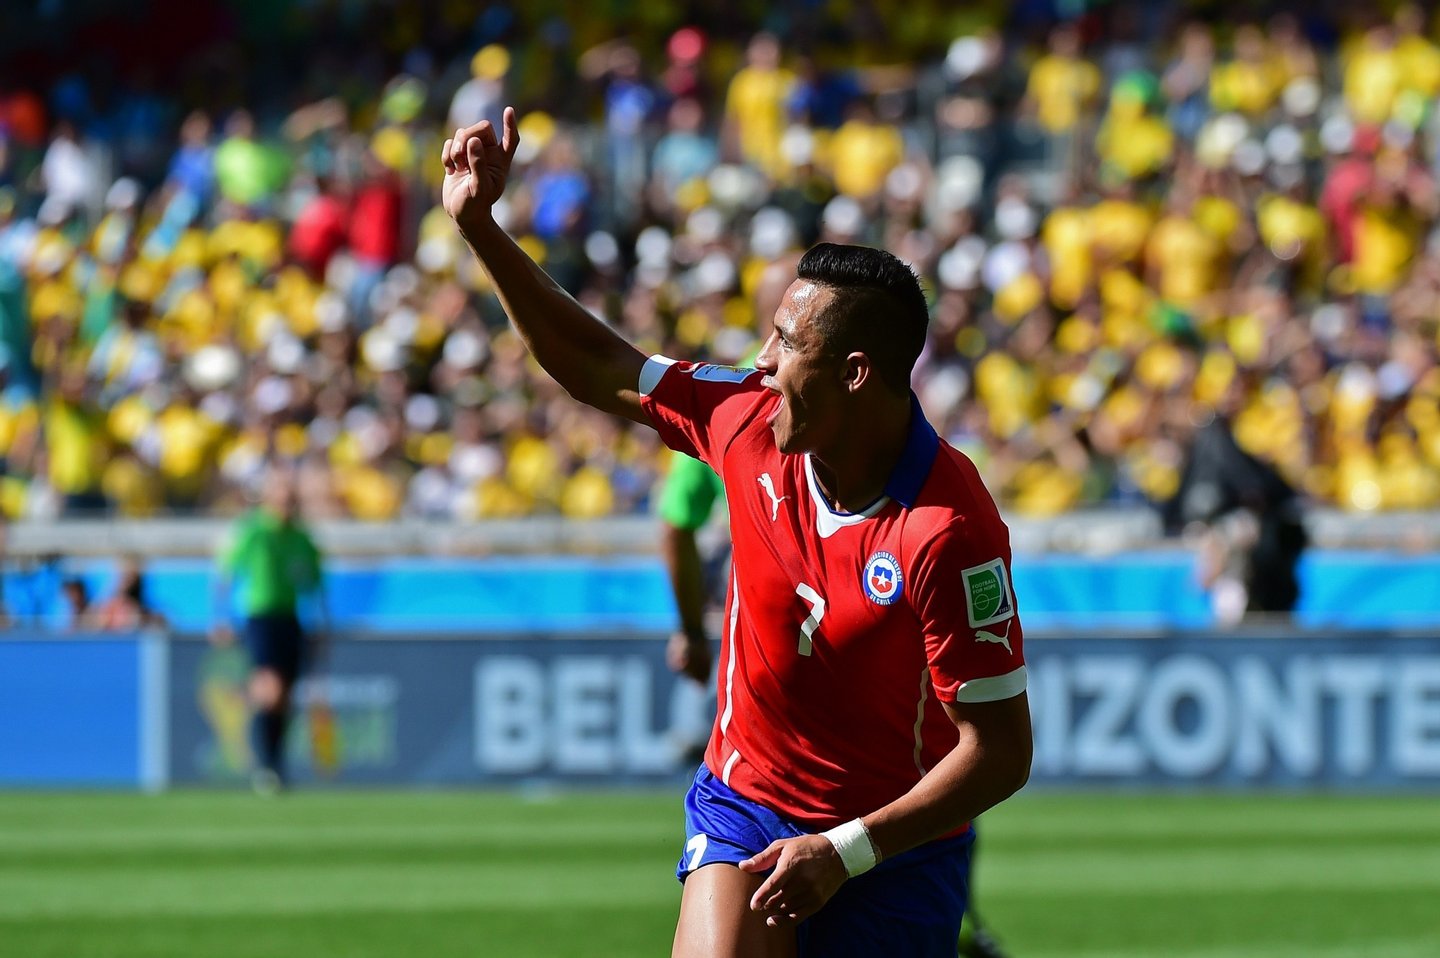 Chile's forward Alexis Sanchez celebrates after scoring a goal during the Round of 16 football match between Brazil and Chile at The Mineirao Stadium in Belo Horizonte during the 2014 FIFA World Cup on June 28, 2014. AFP PHOTO / MARTIN BERNETTI